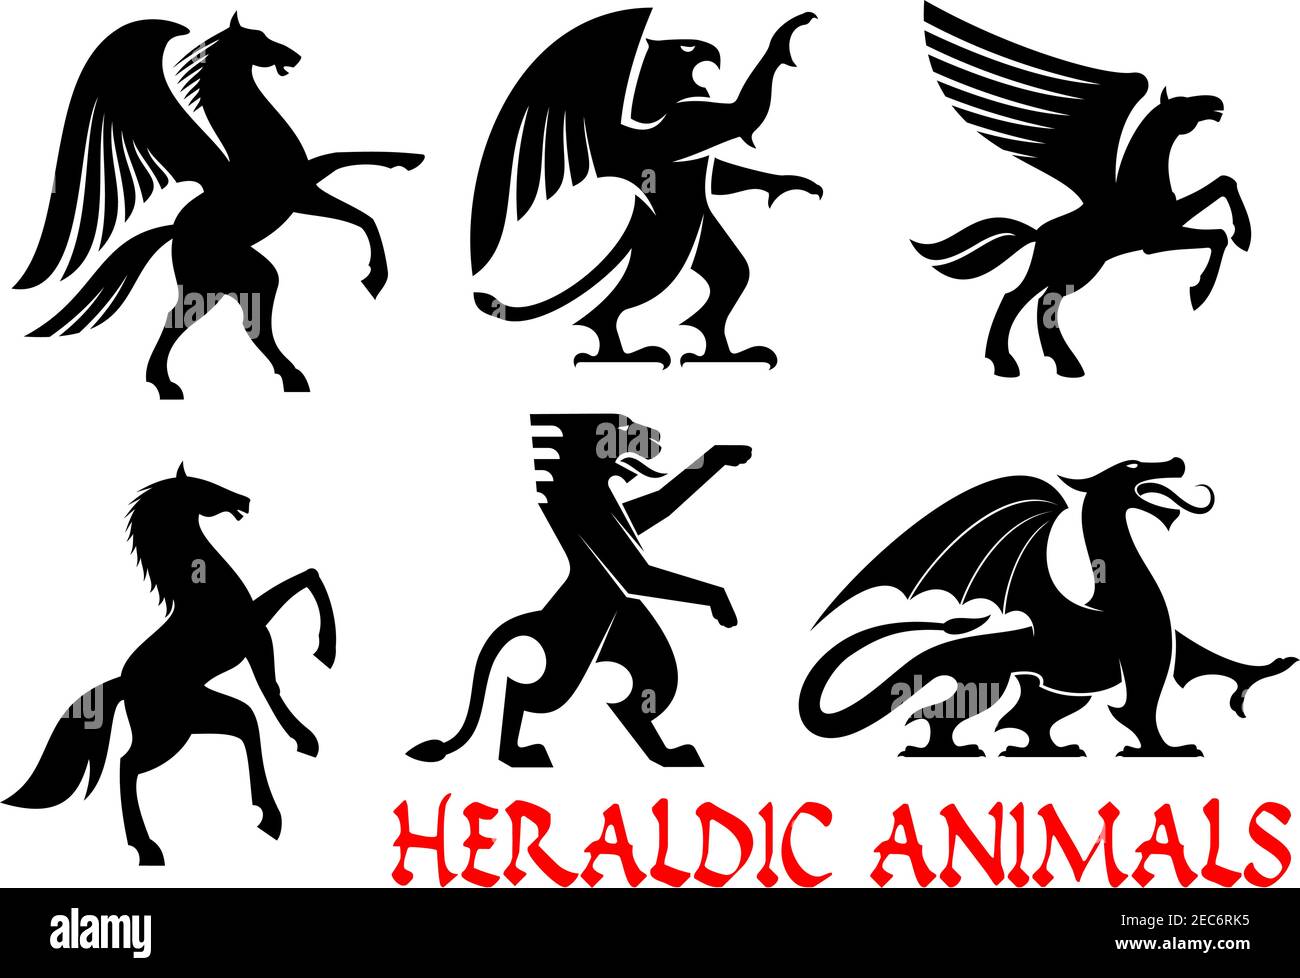 Heraldic animals icons. Pegasus, Griffin, Dragon, Lion, Horse, Tiger, Unicorn silhouettes. Gothic mythical creatures for tattoo, heraldry or tribal sh Stock Vector